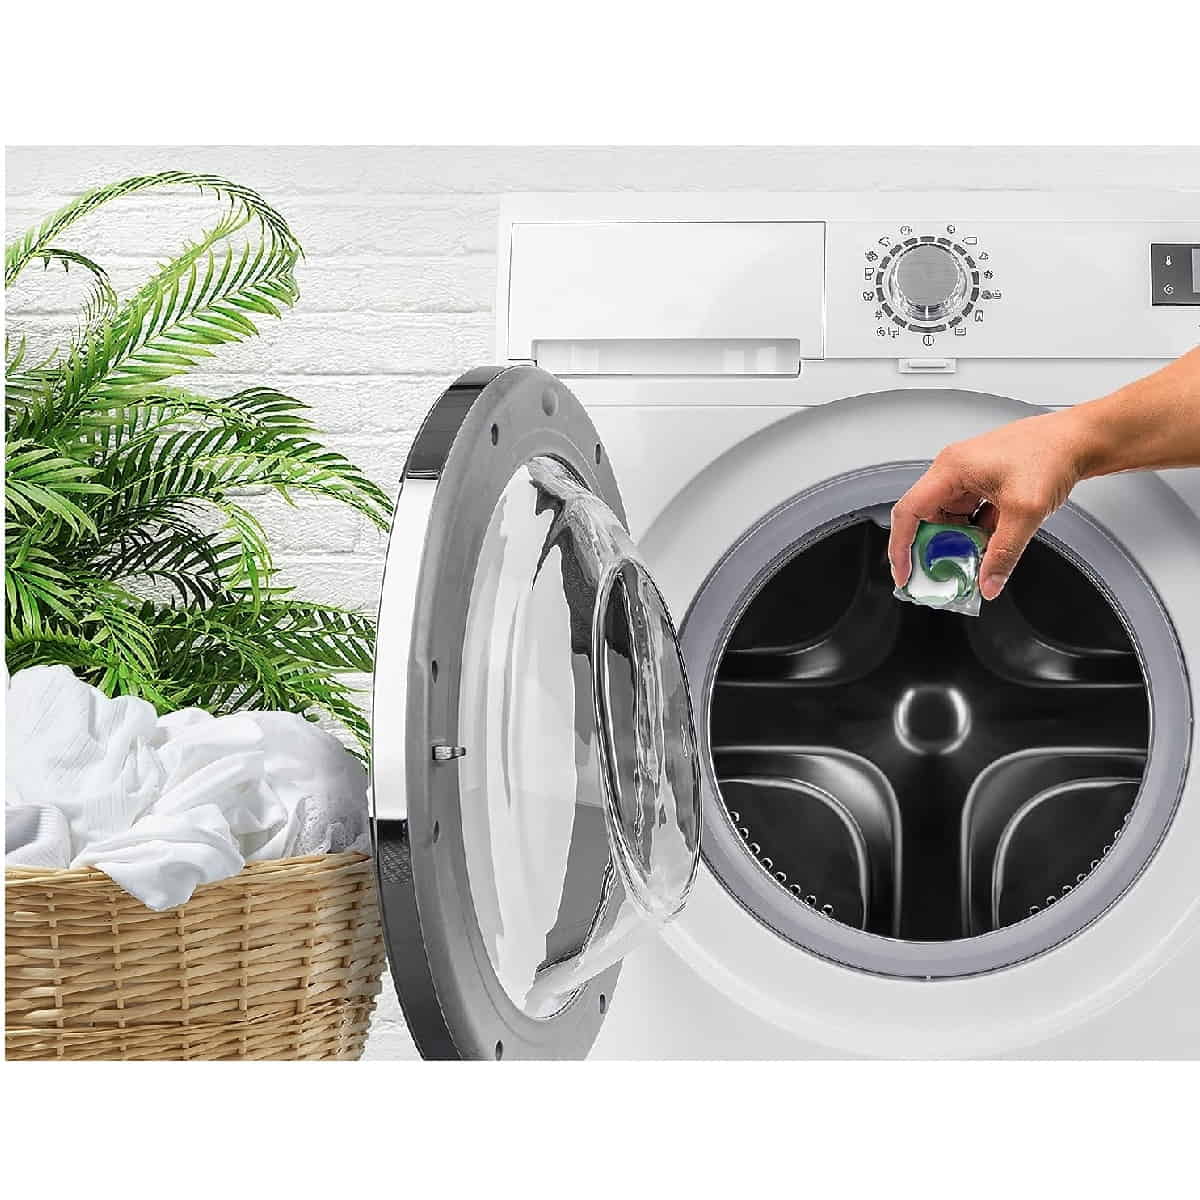 Do you put tide pods directly in washer?